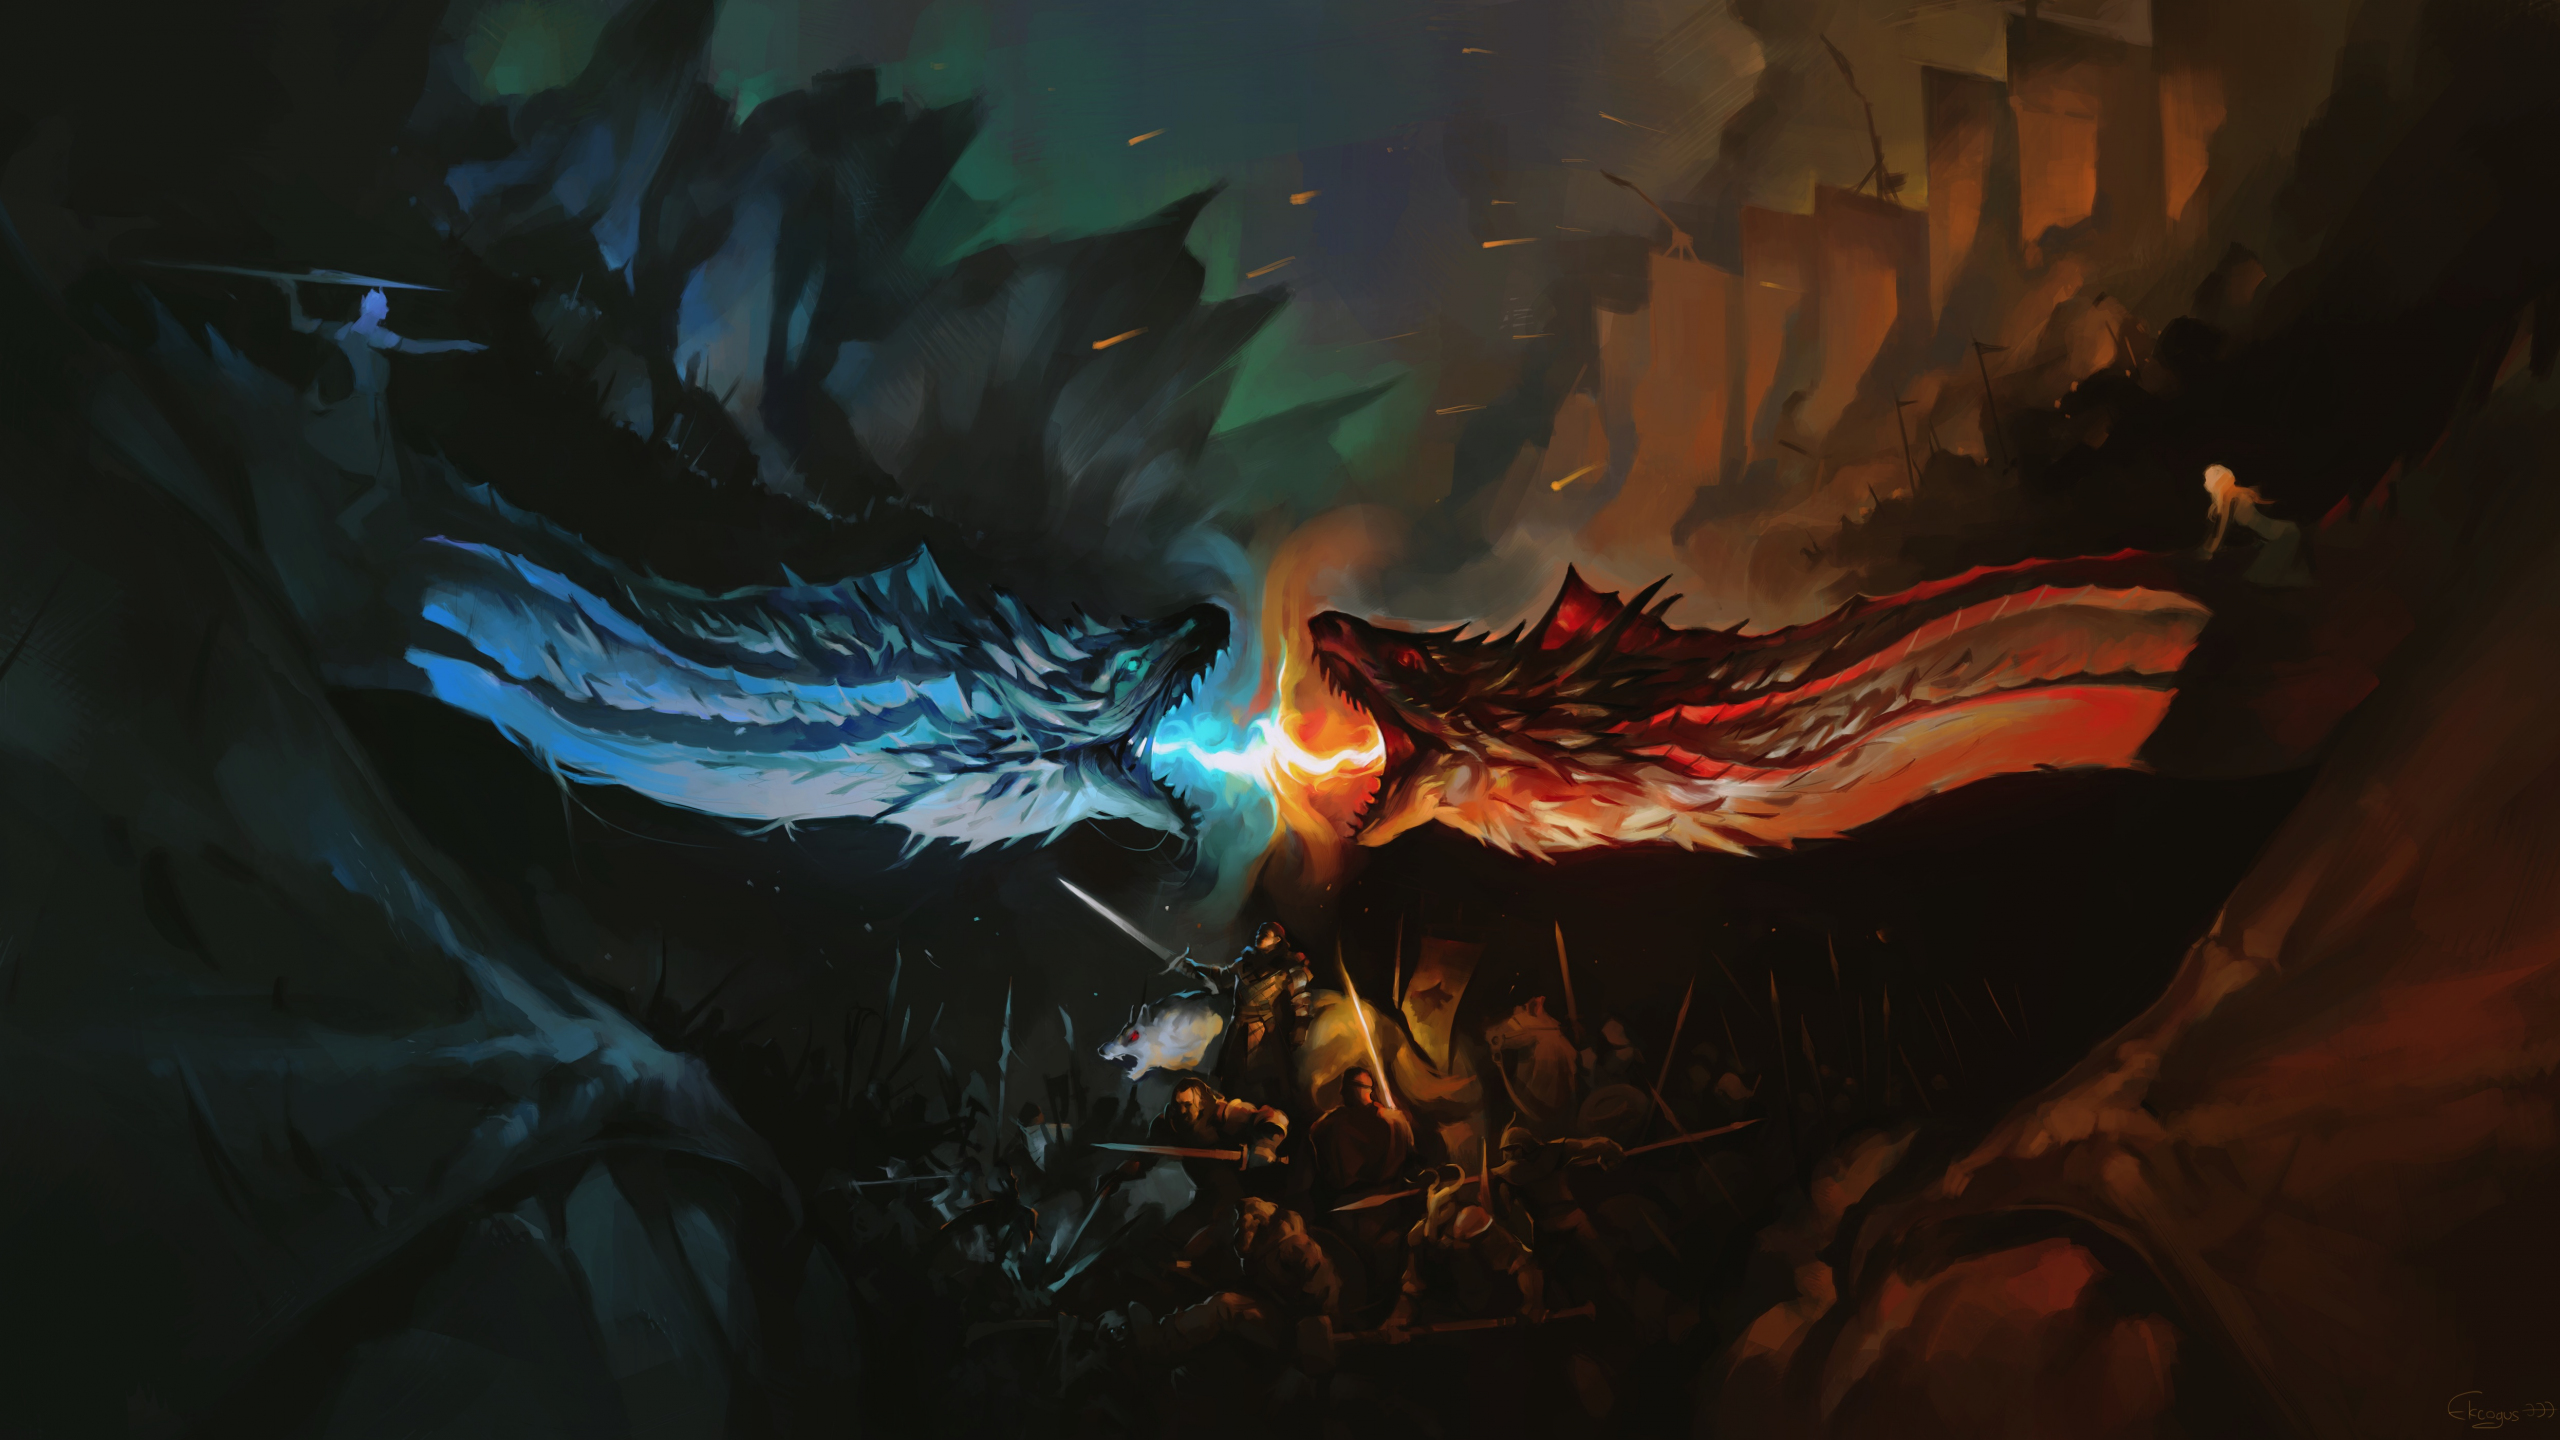 Download game of thrones tv series dragons fight fan art